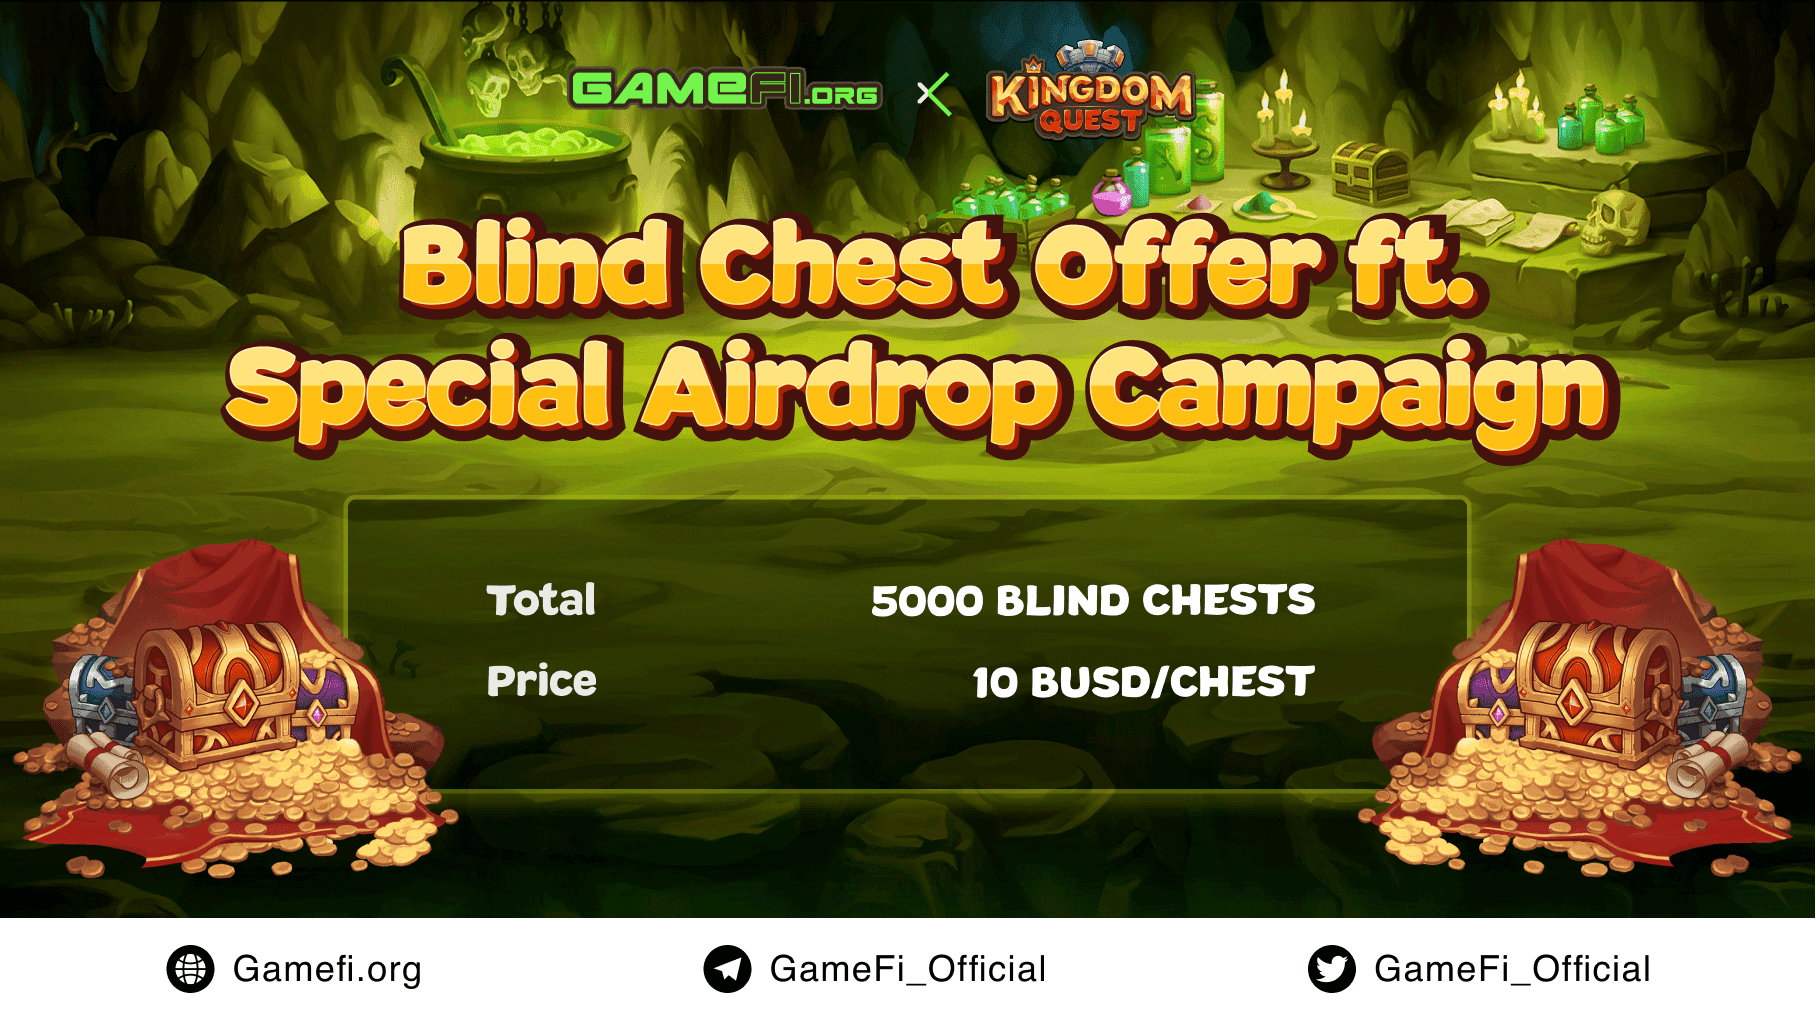 Kingdom Quest Joins The NFT Race With Blind Chest INO ft. Special Airdrop Campaign